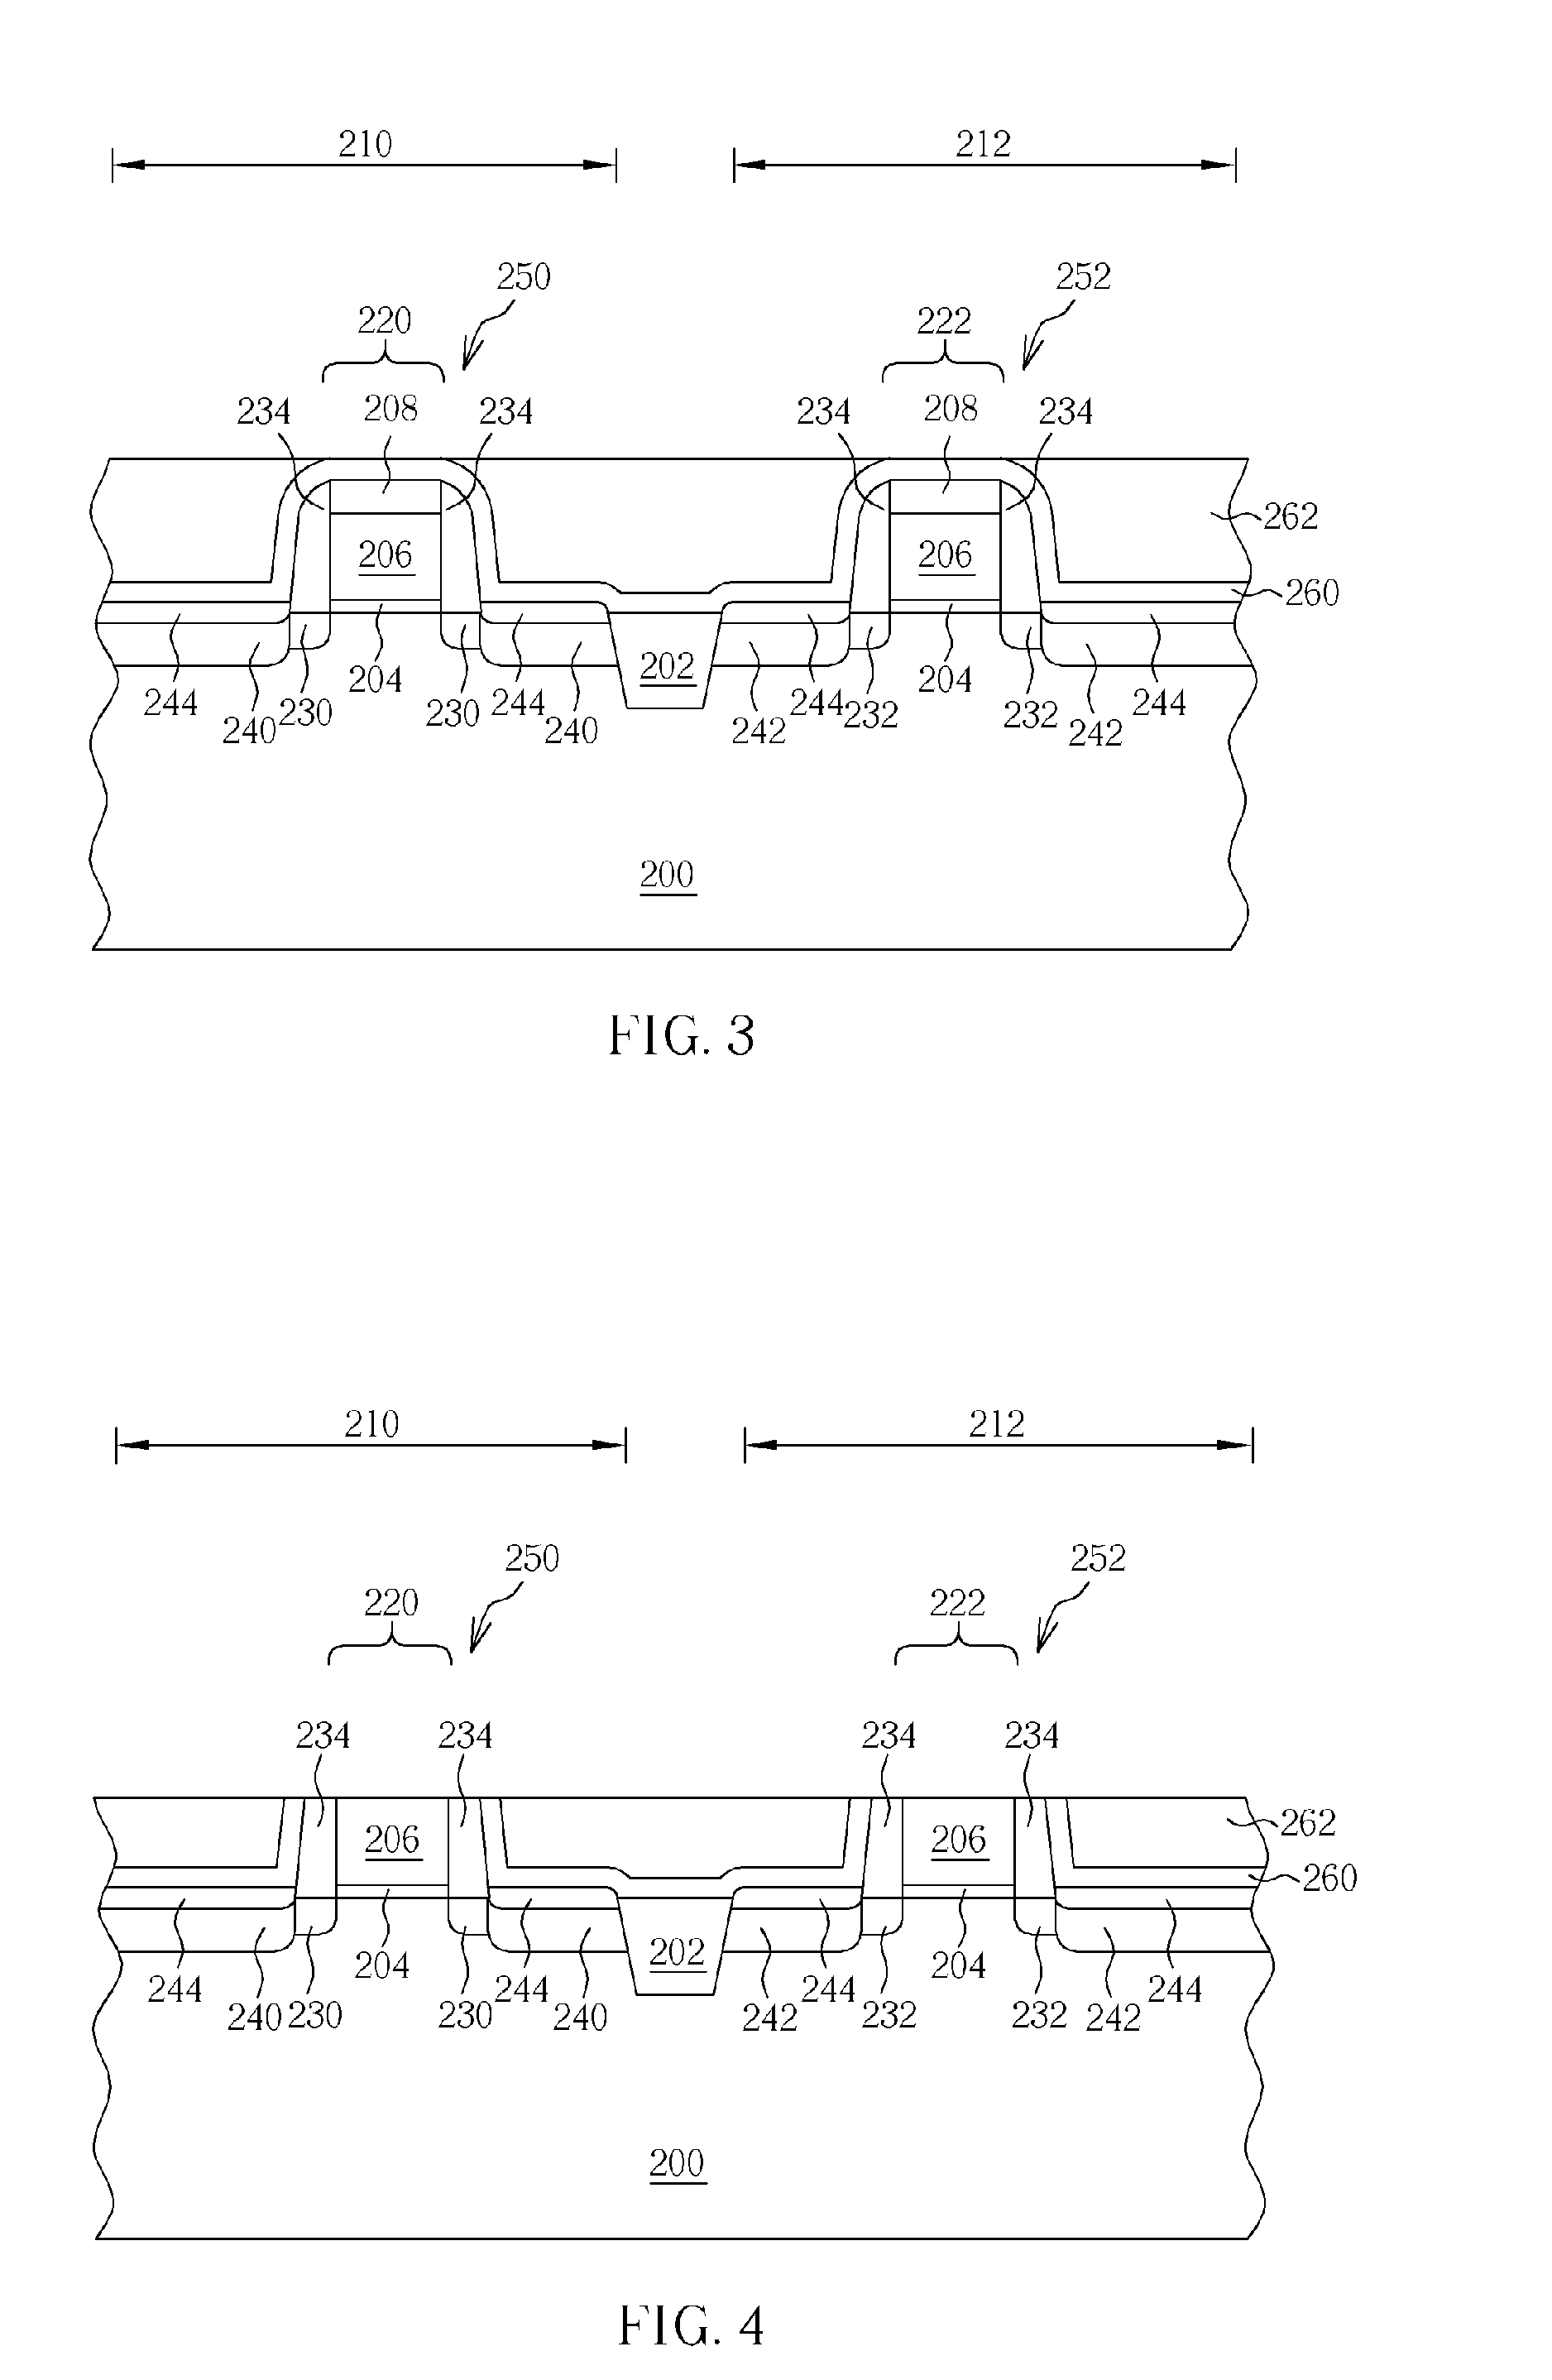 Method for manufacturing a CMOS device having dual metal gate